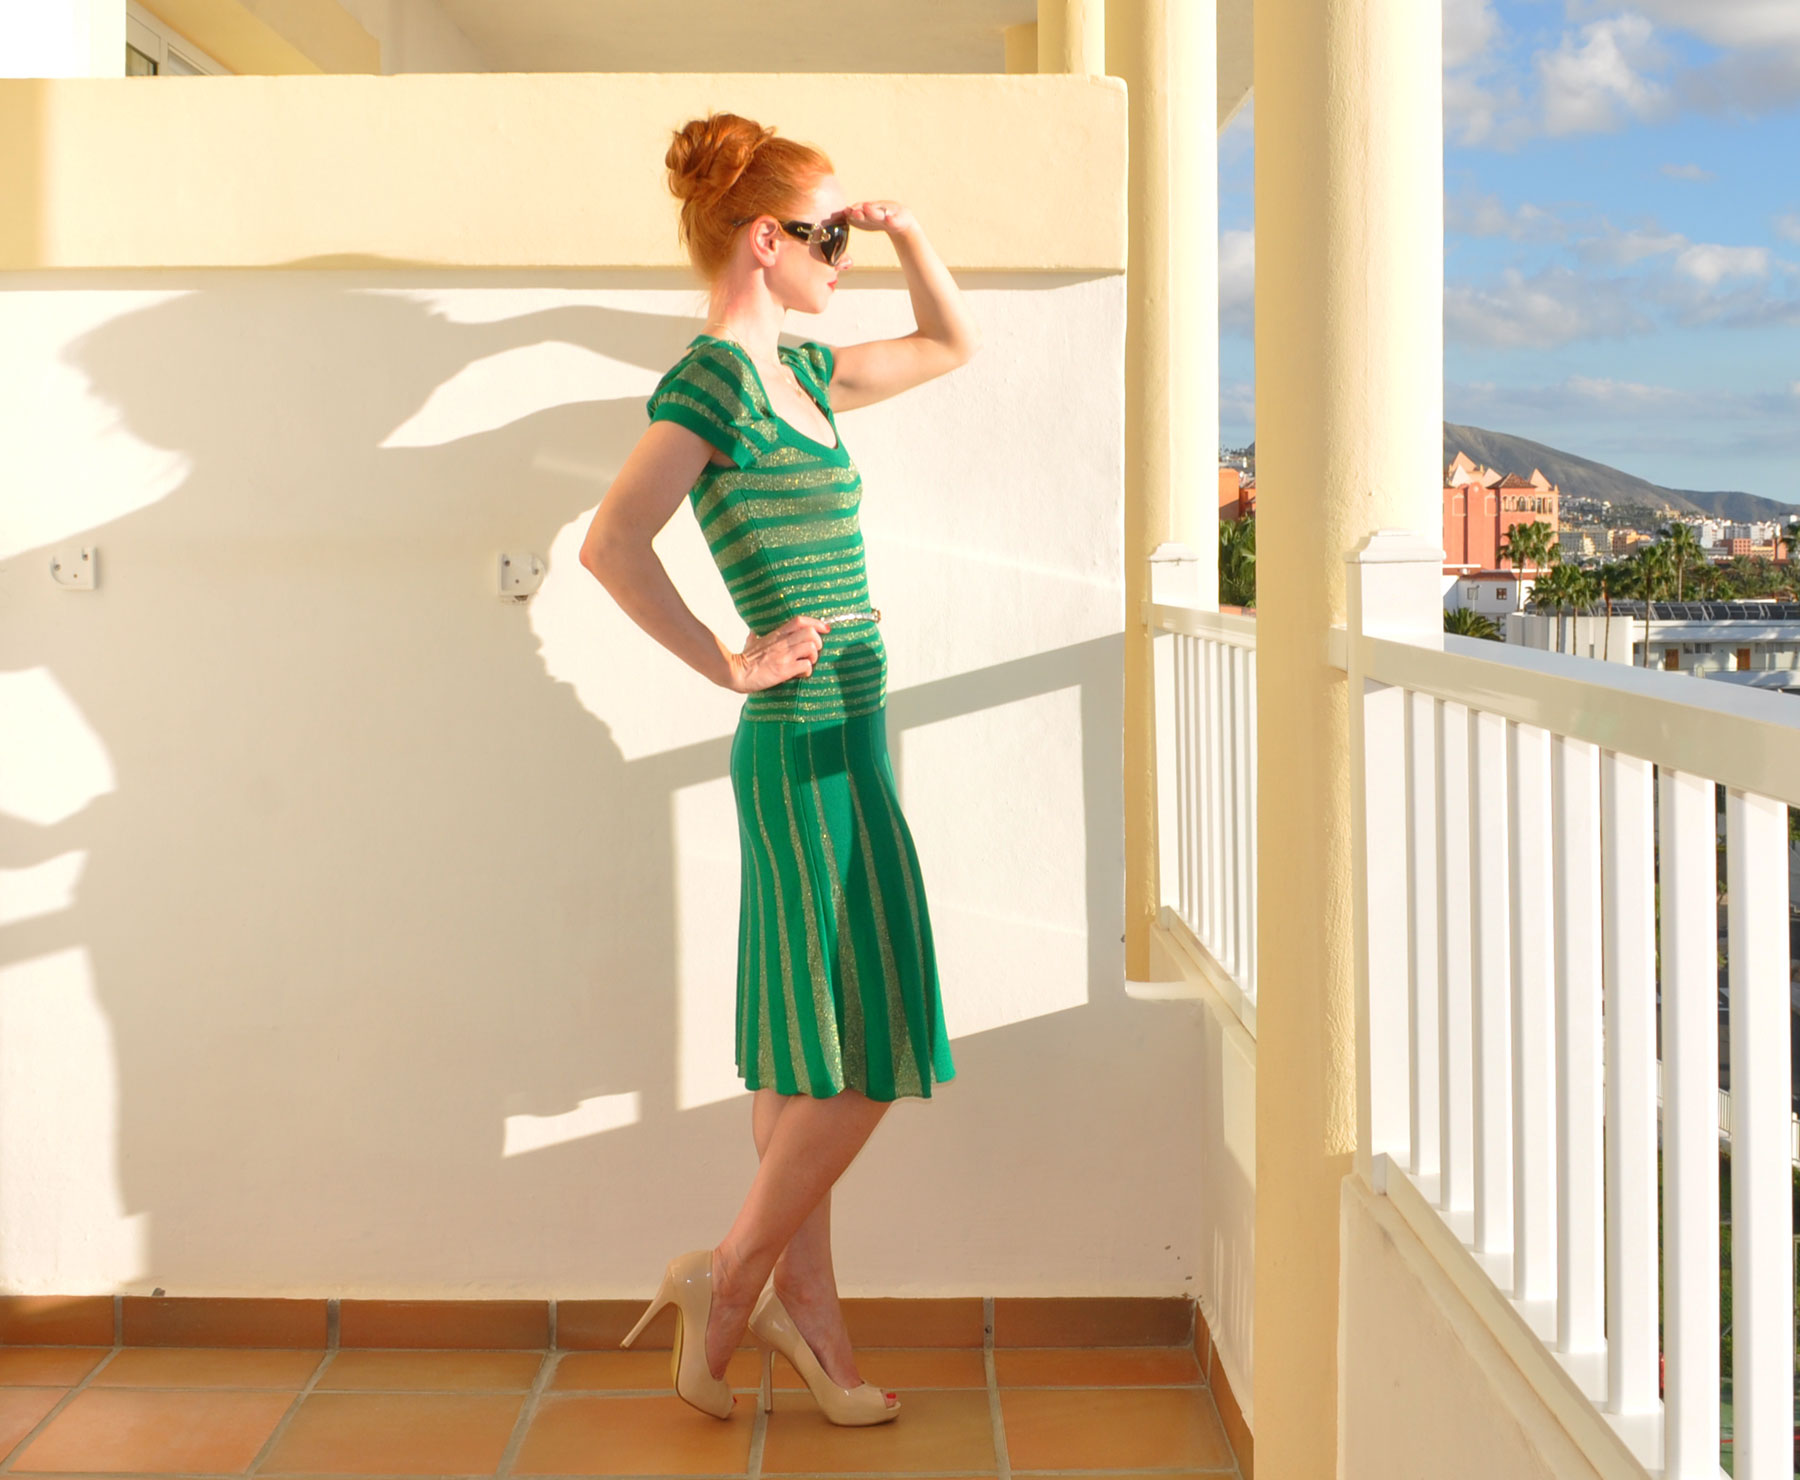 Amber wears a green and gold dress with high heeled shoes and shades her eyes from the sun as she looks out from her hotel balcony in Tenerife